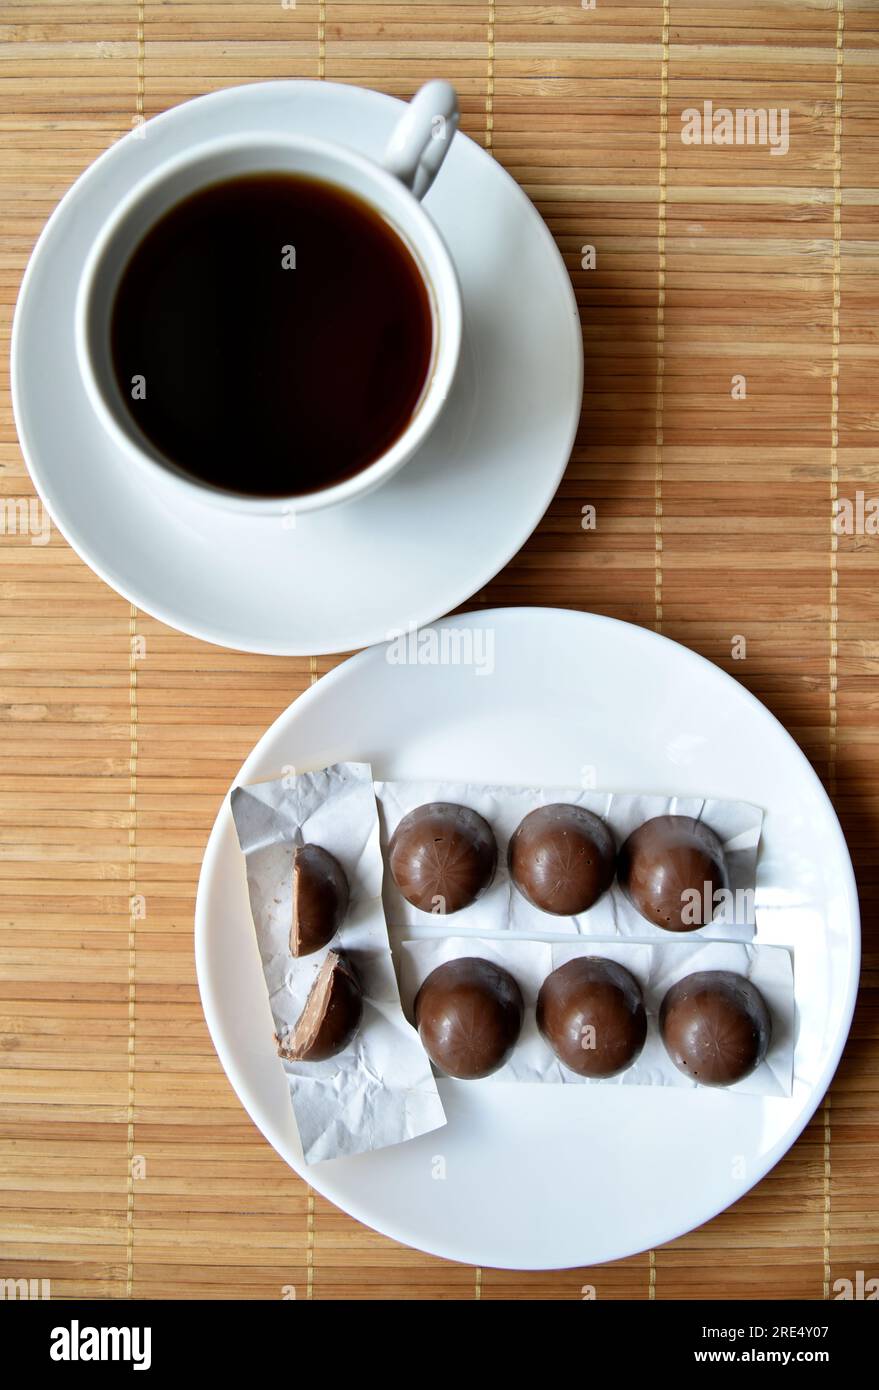 Tea couple on a mat with chocolate bars. A porcelain cup and saucer and tea with sweets. Art design. Stock Photo